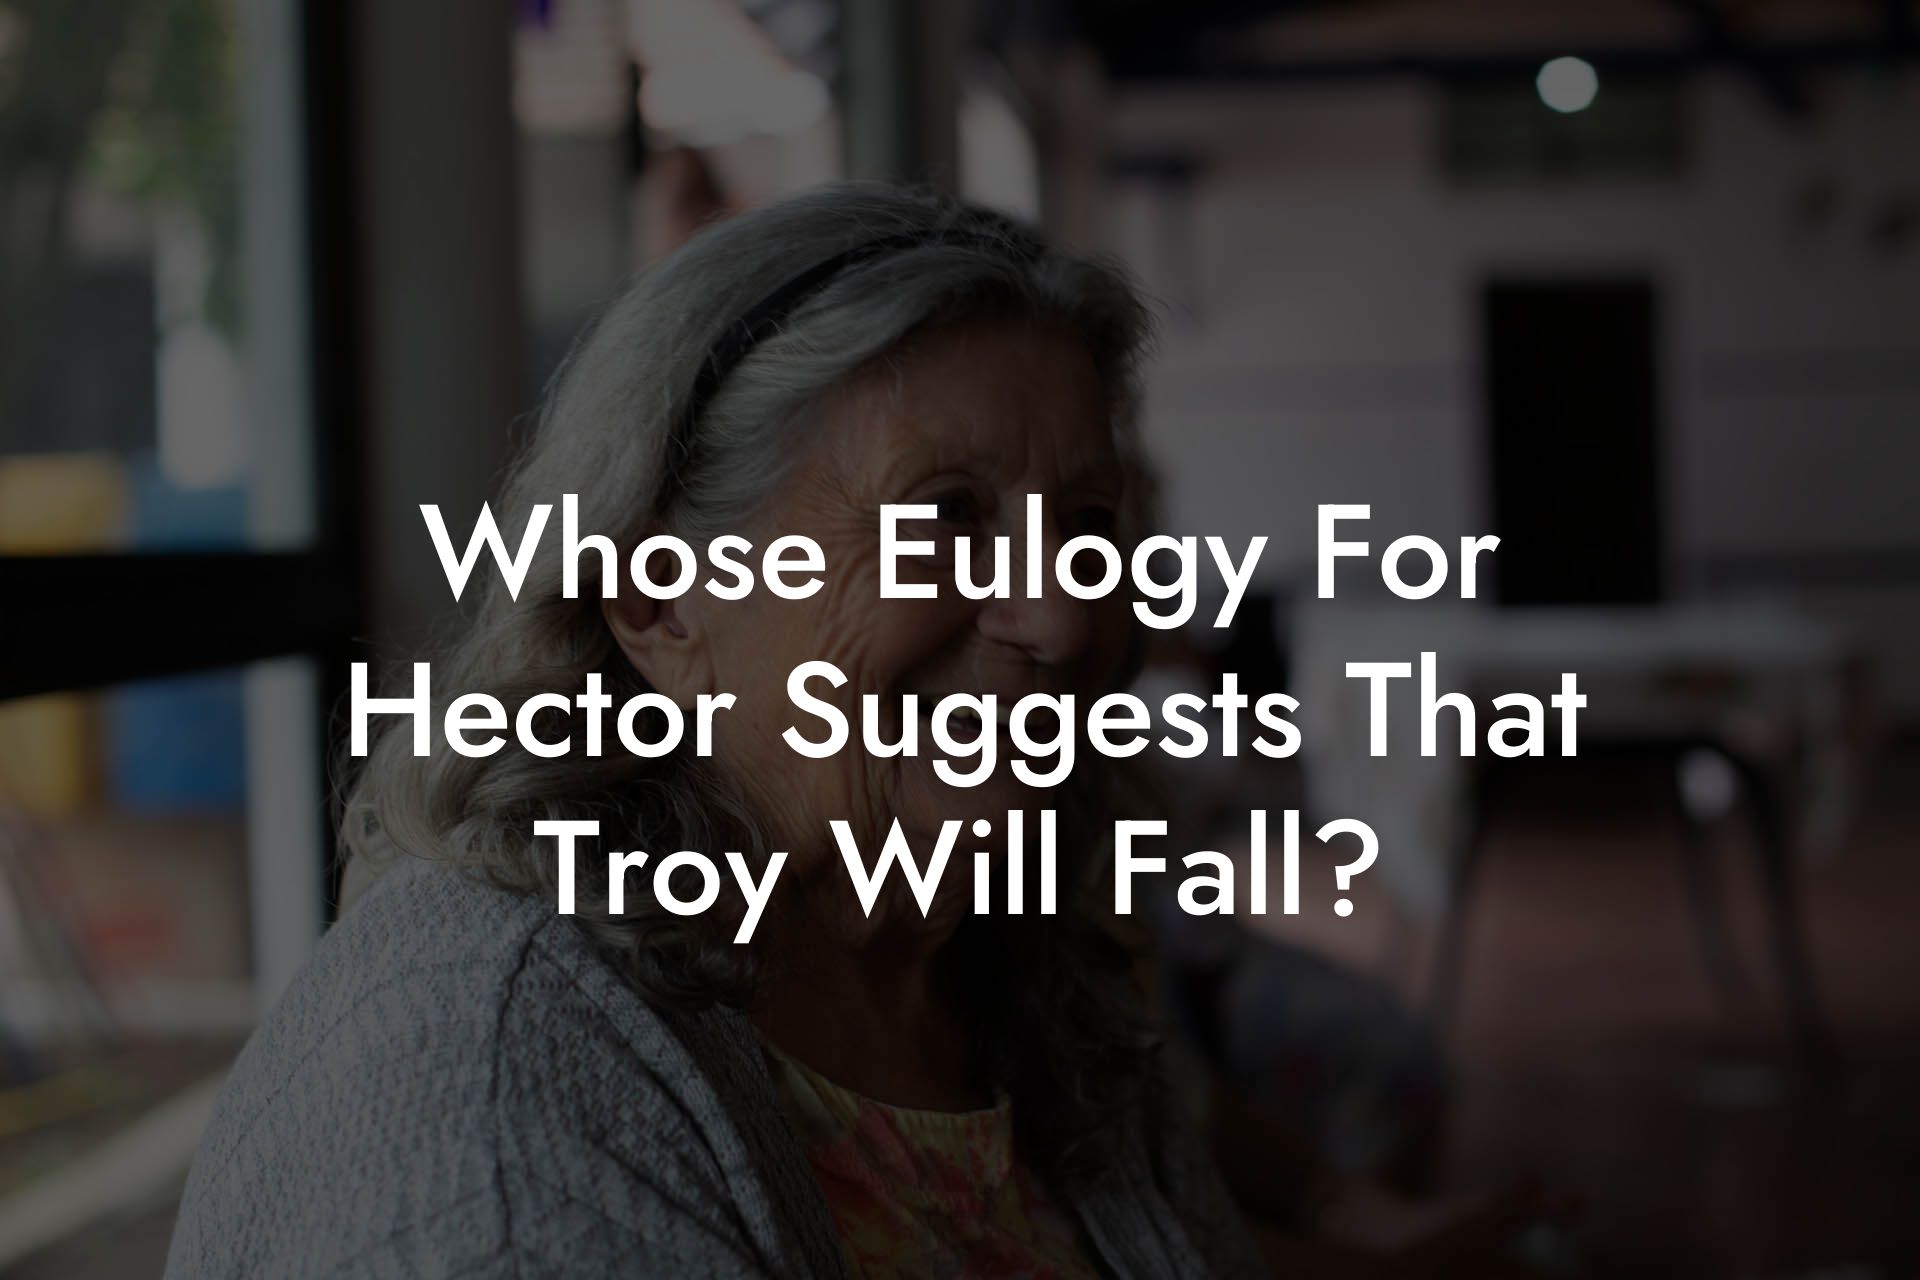 Whose Eulogy For Hector Suggests That Troy Will Fall?